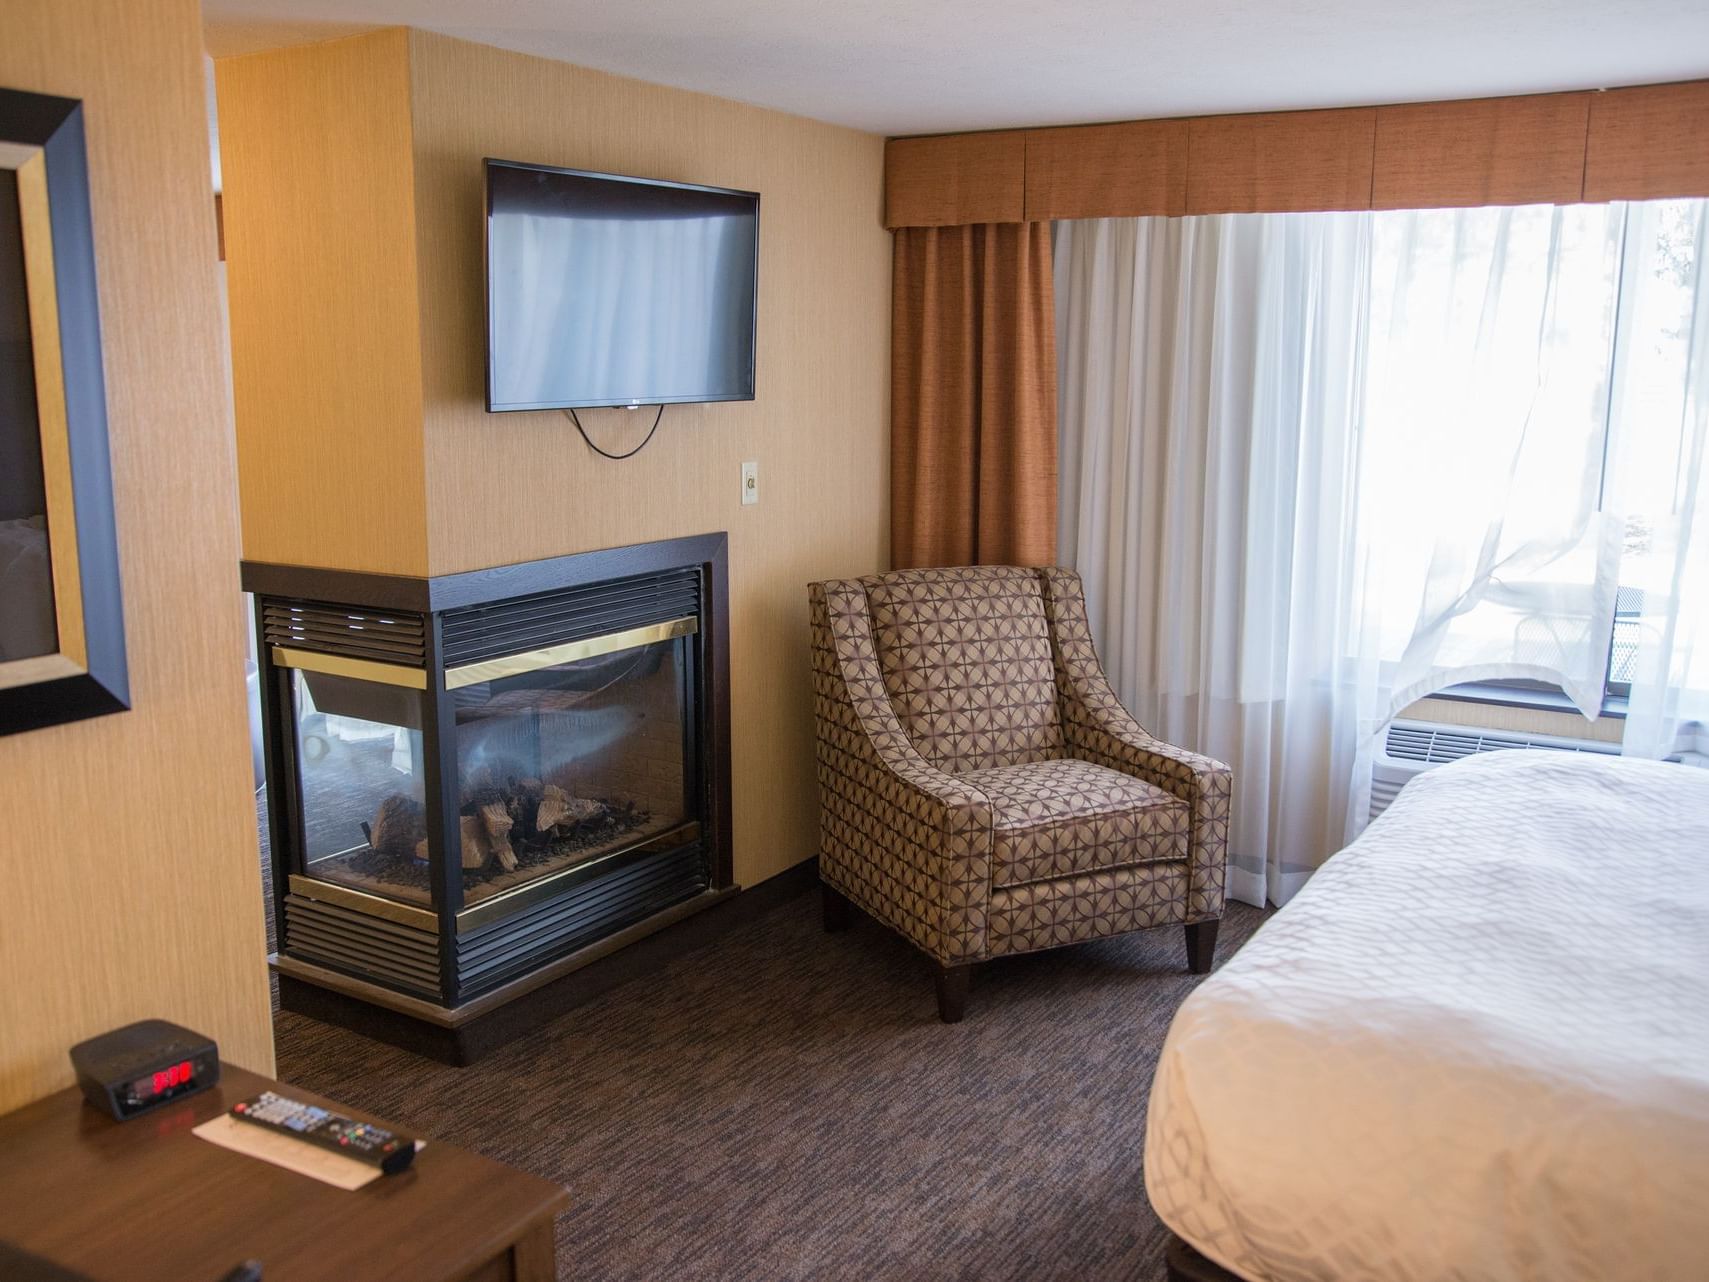 Deluxe Suite with a fireplace & television at Evergreen Resort